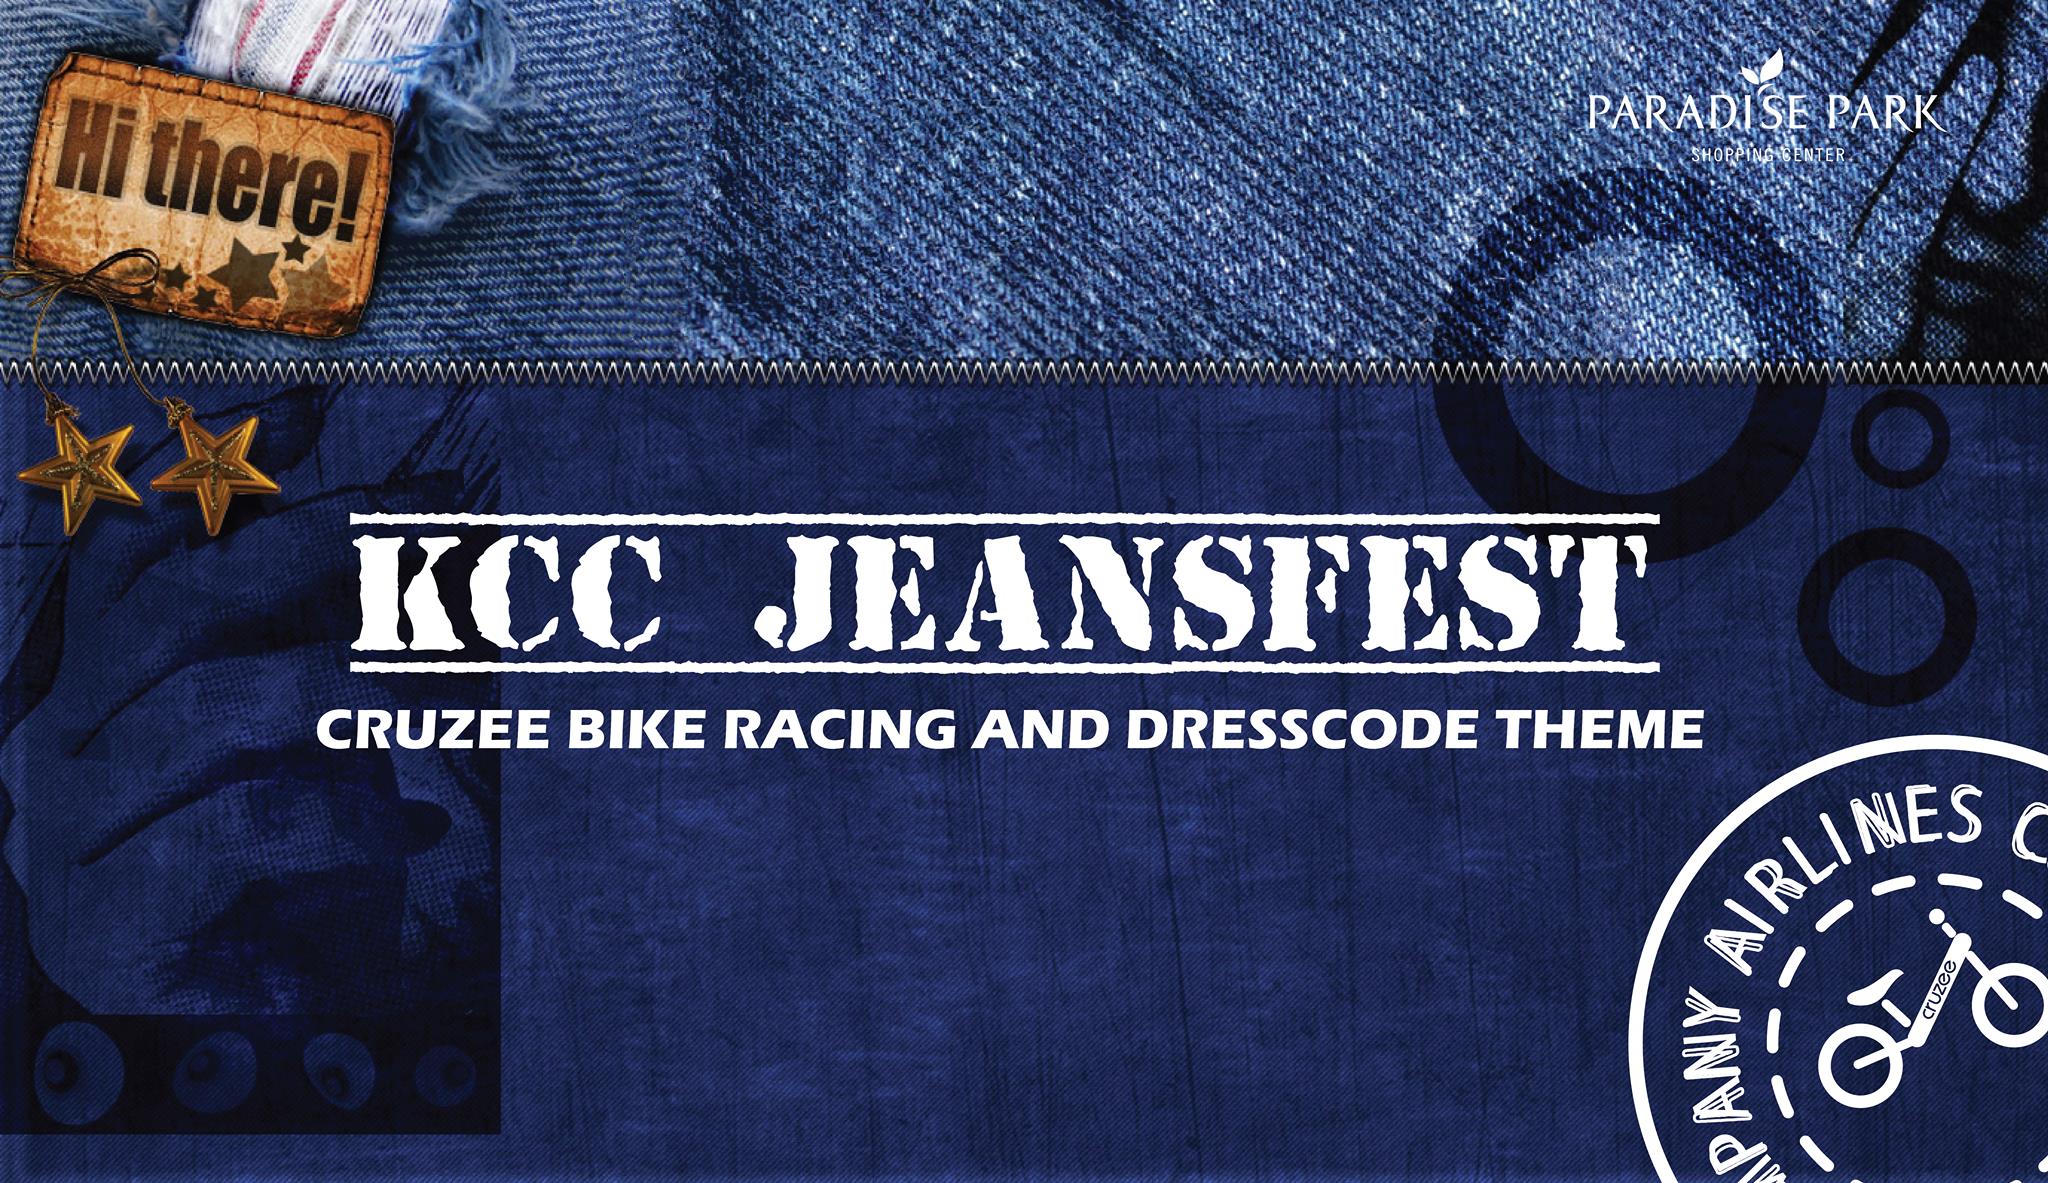 Kcc Jeansfest Presented by Paradise Park